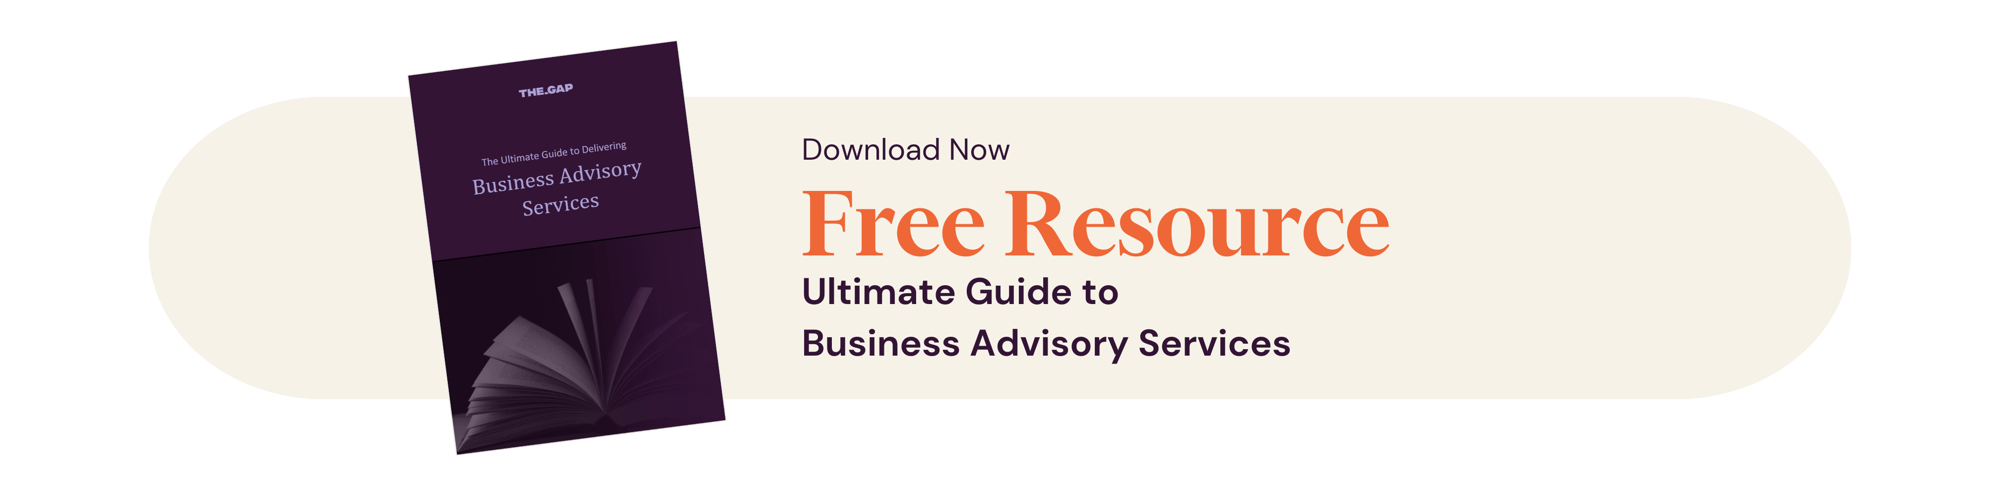 Download Banner - The Ultimate Guide to Business Advisory Services